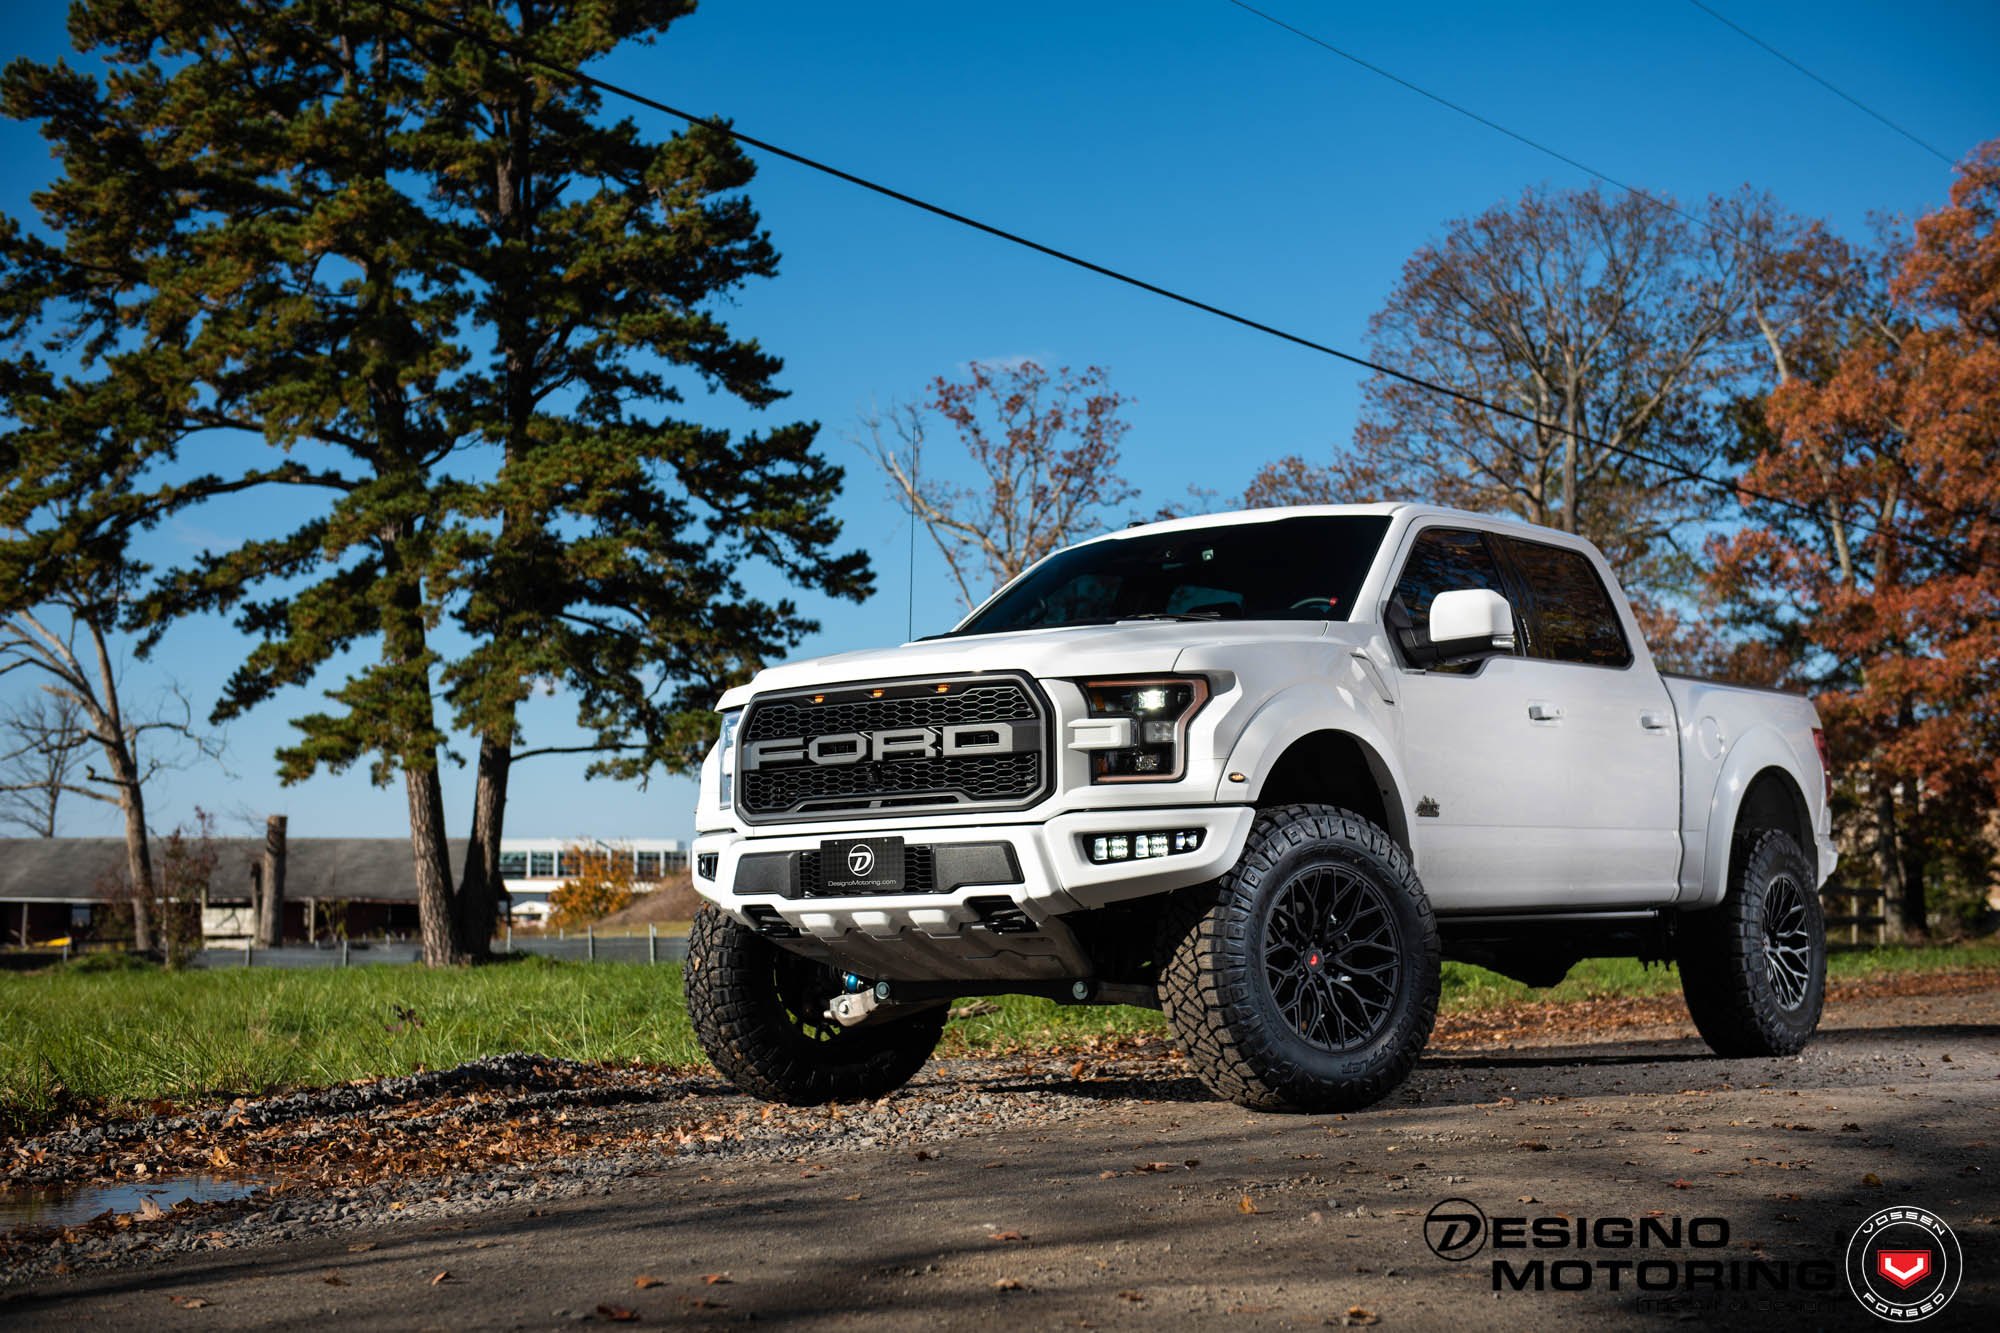 Forged Vossen Wheels on White Lifted Ford F-150 - Photo by Vossen Wheels